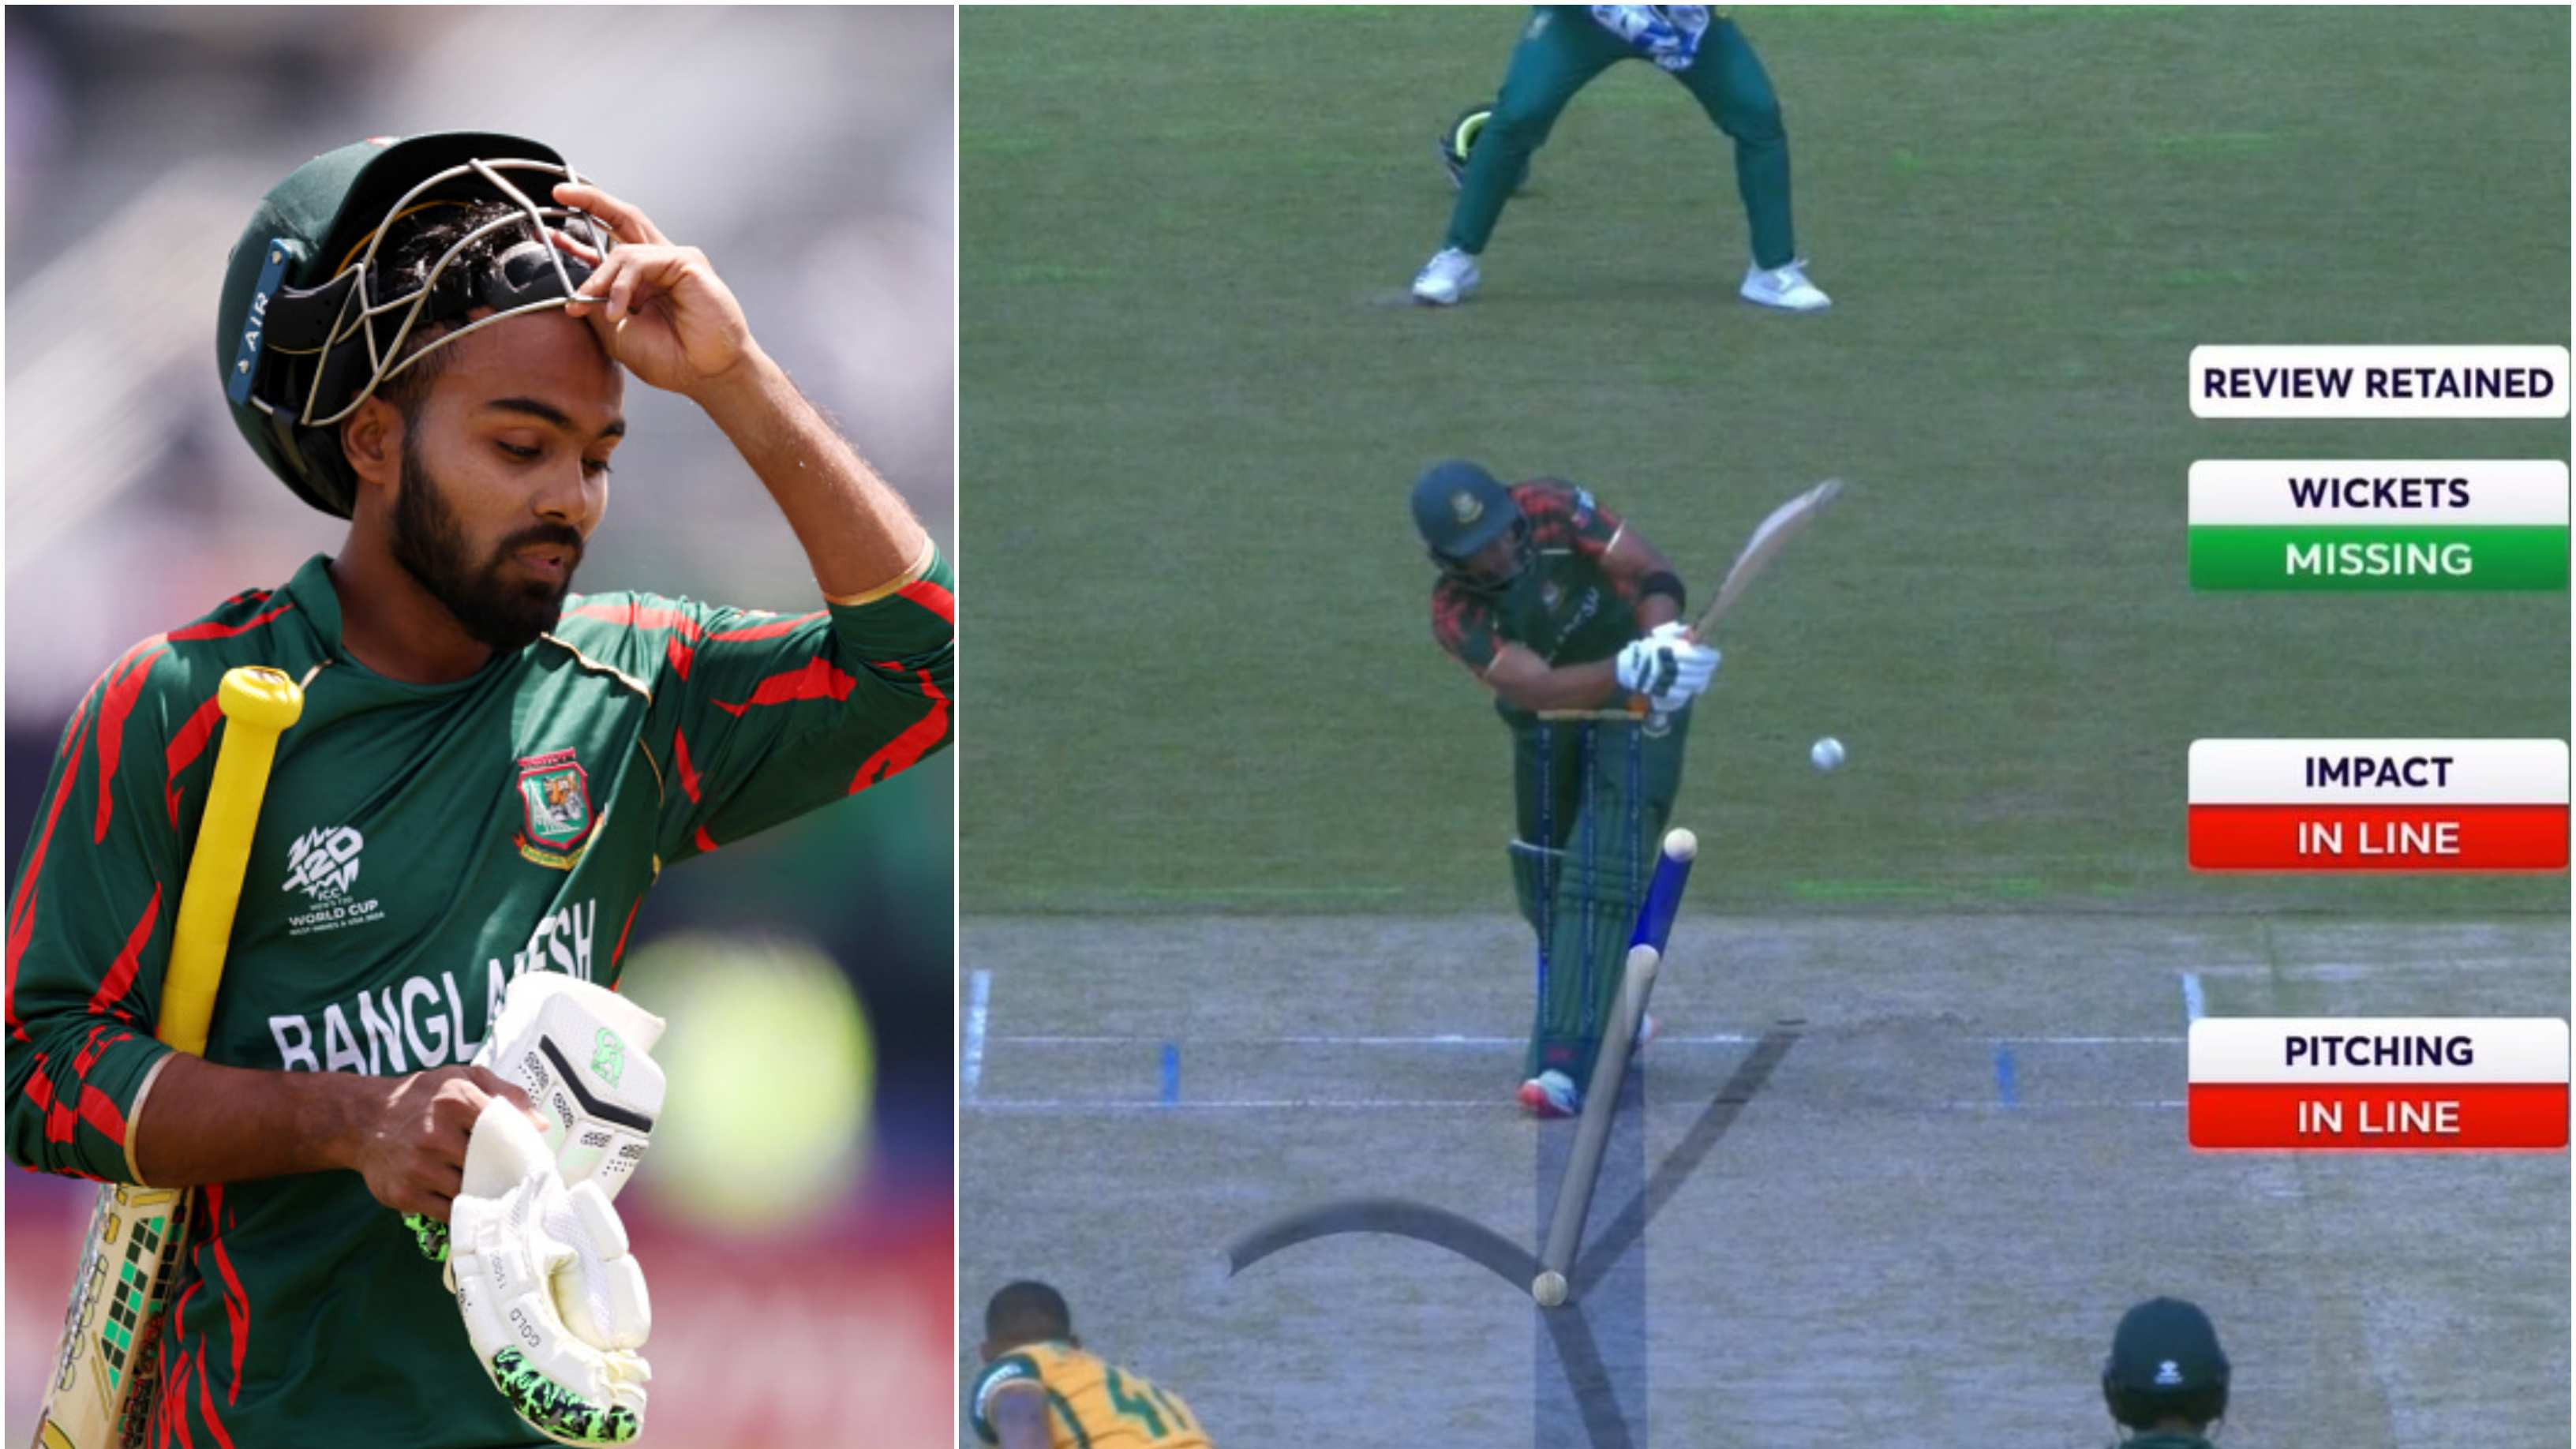 “Those four runs could have…”: Towhid Hridoy calls out umpiring standards in Bangladesh’s narrow loss to South Africa